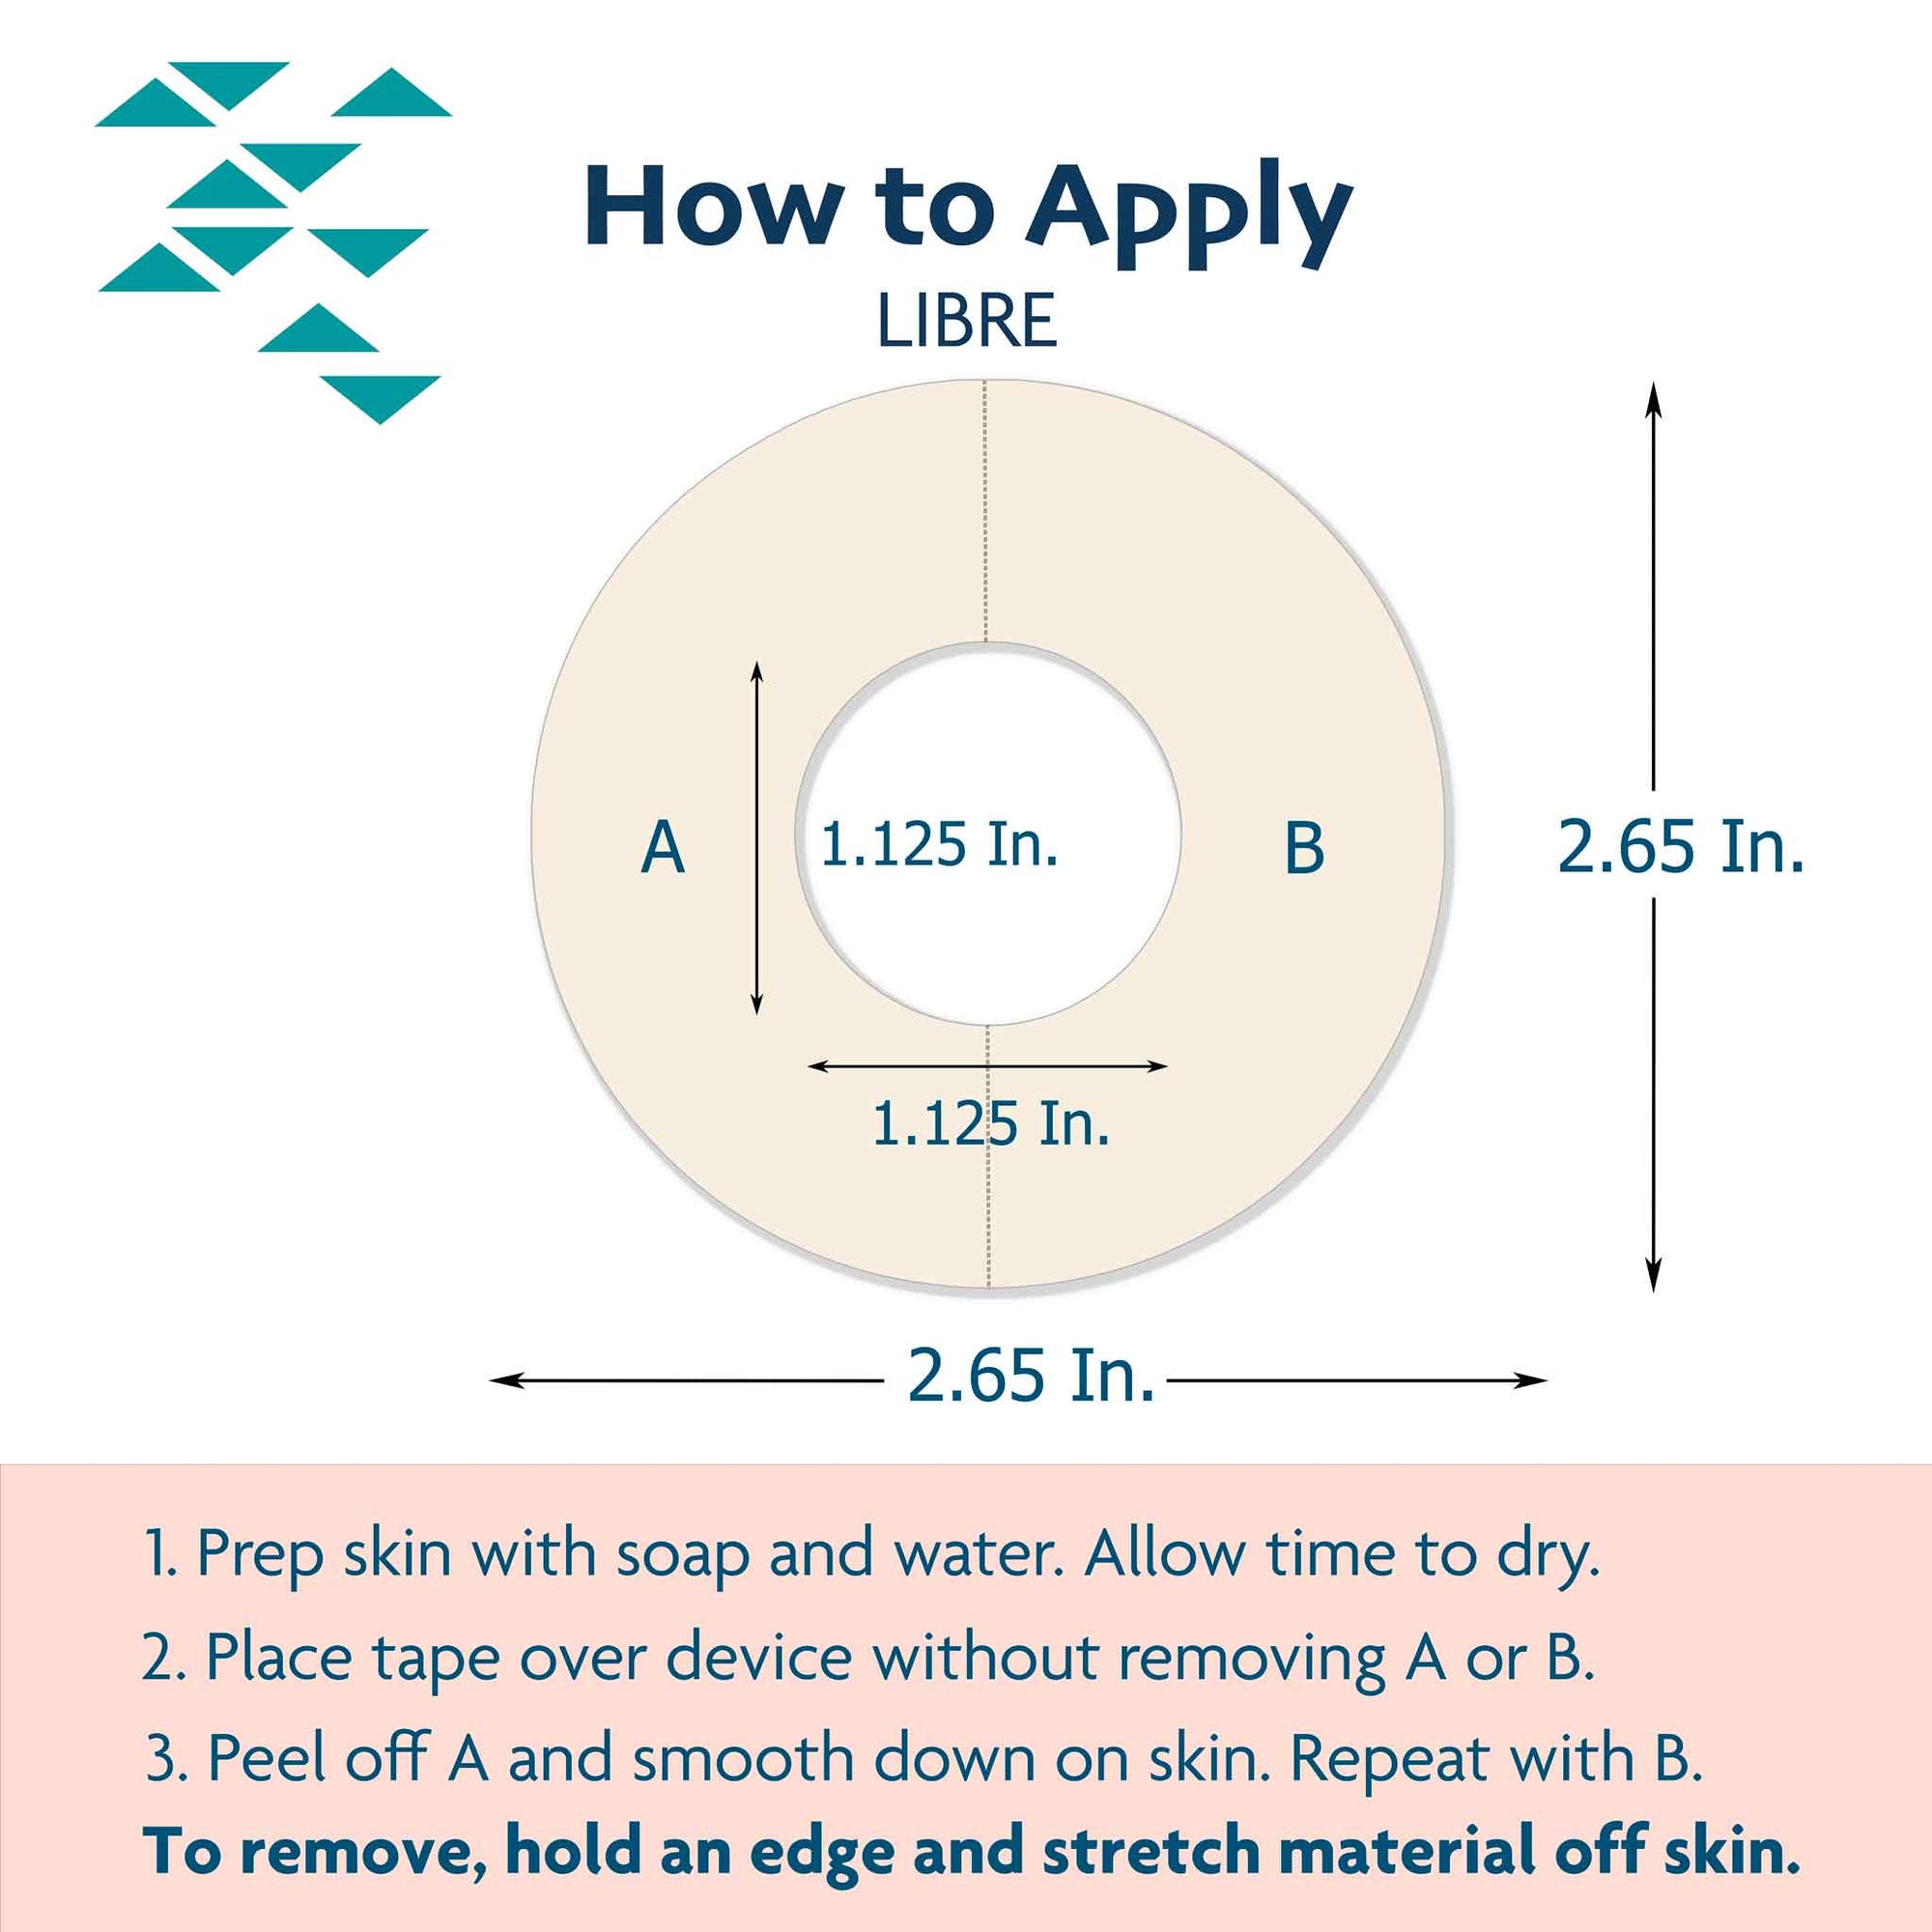 ExpressionMed Libre CGM adhesive over freestyle device application instructions